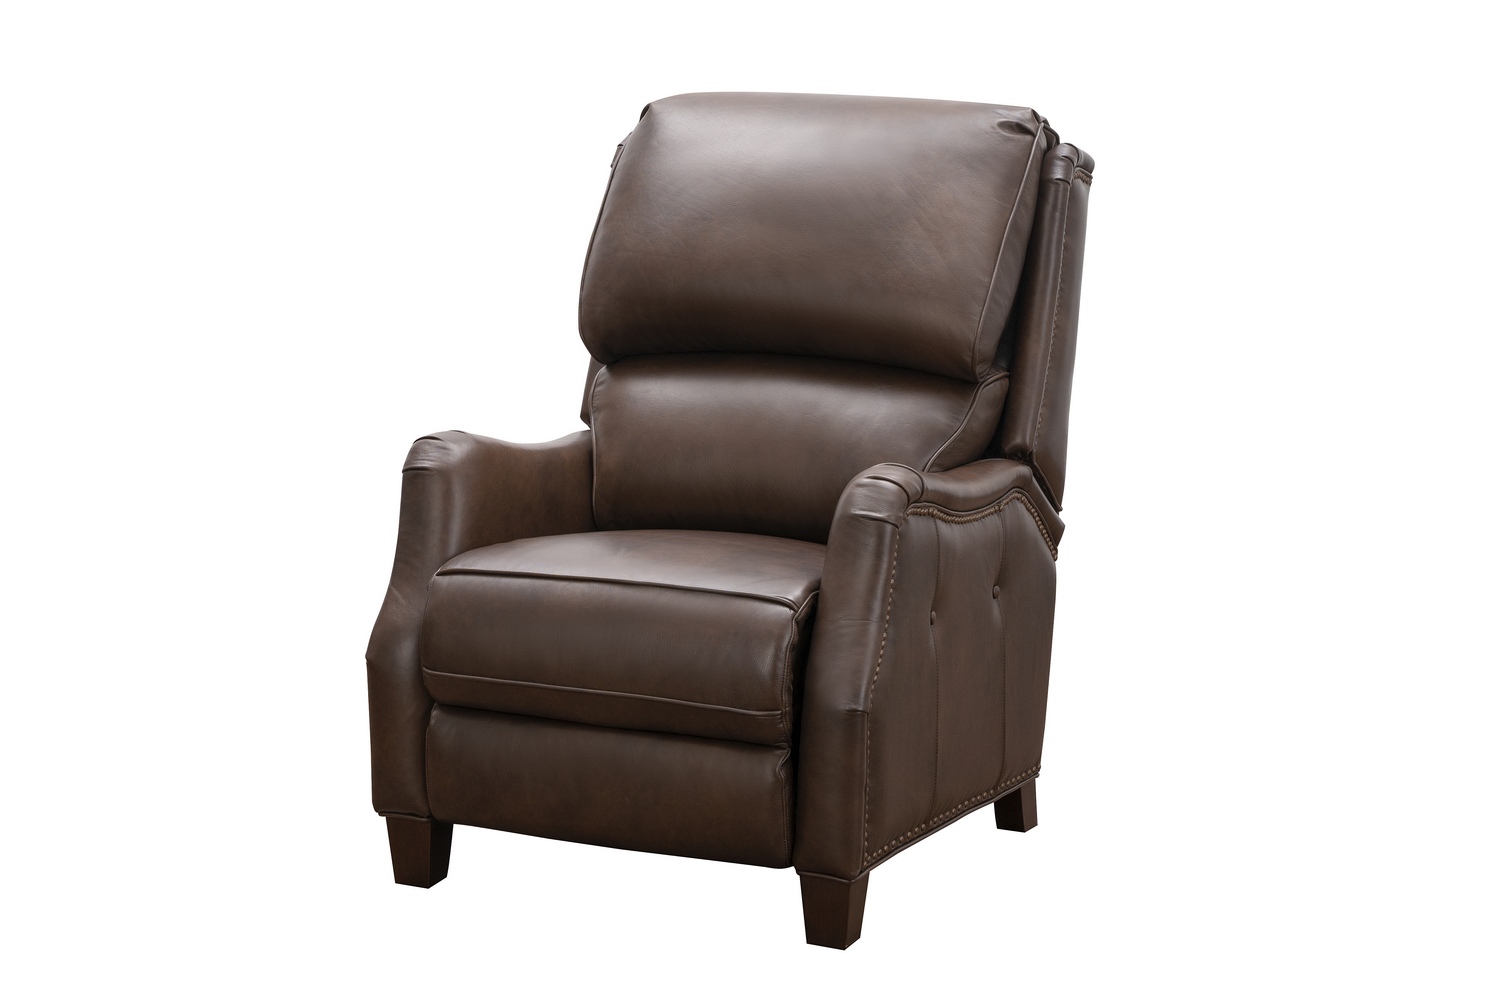 Barcalounger Morrison Big and Tall Power Recliner Chair - Ashford Walnut/All Leather